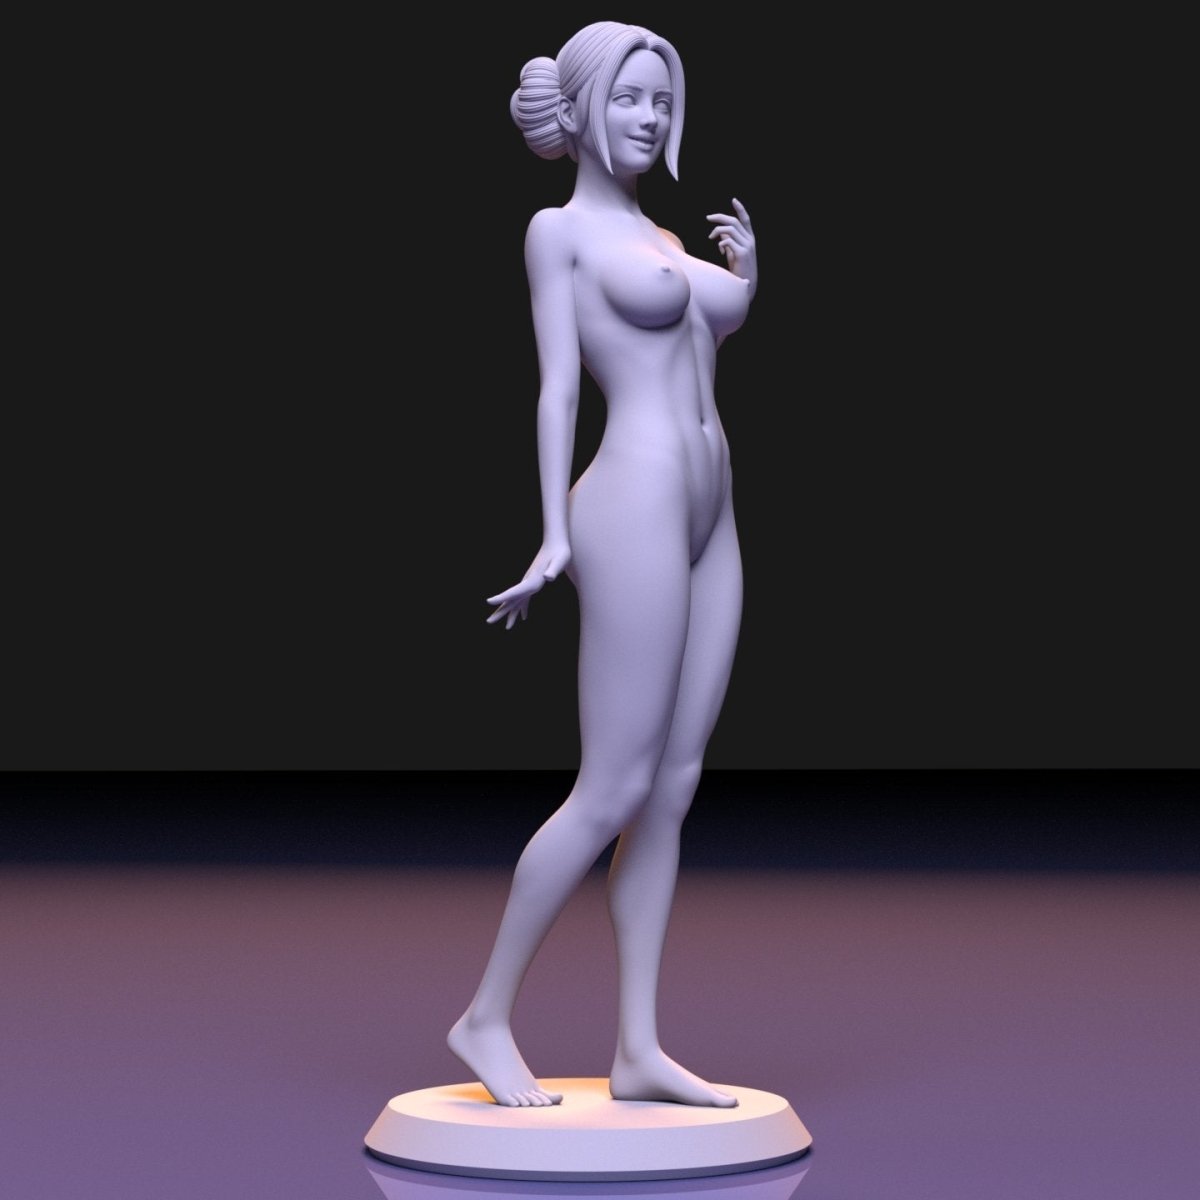 NSFW Resin Miniature Naked Woman NSFW 3D Printed Figurine Fanart Unpainted Miniature Collectibles